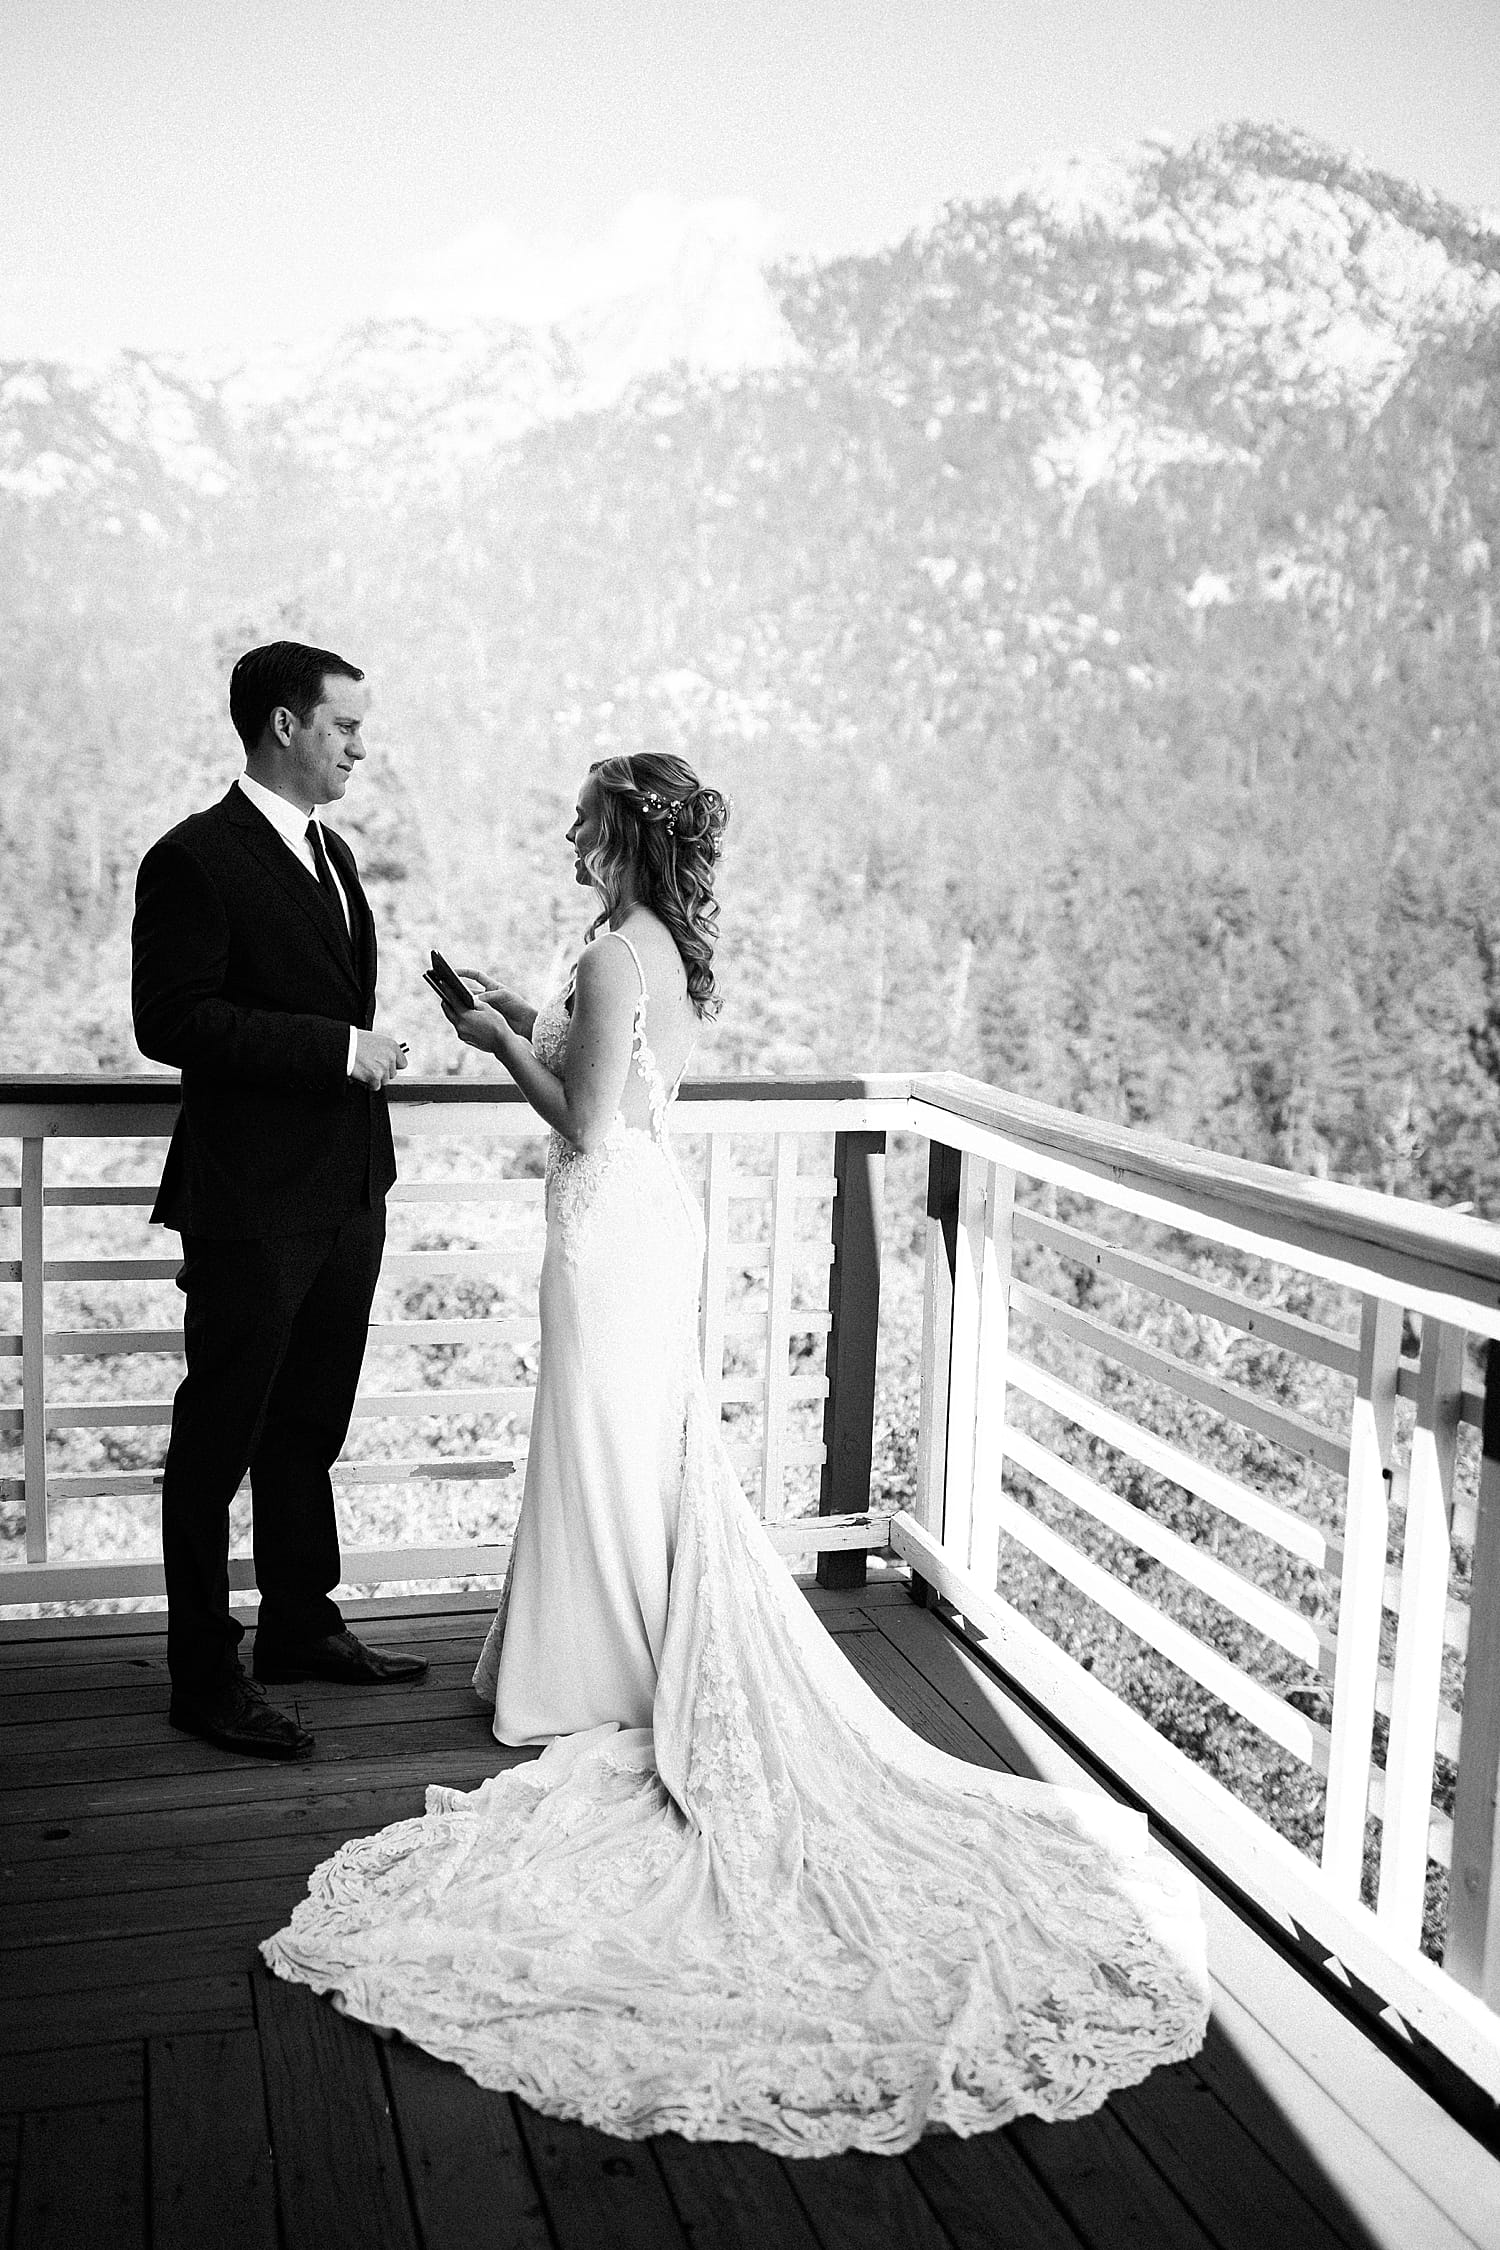 Private vows Idyllwild pine cove wedding